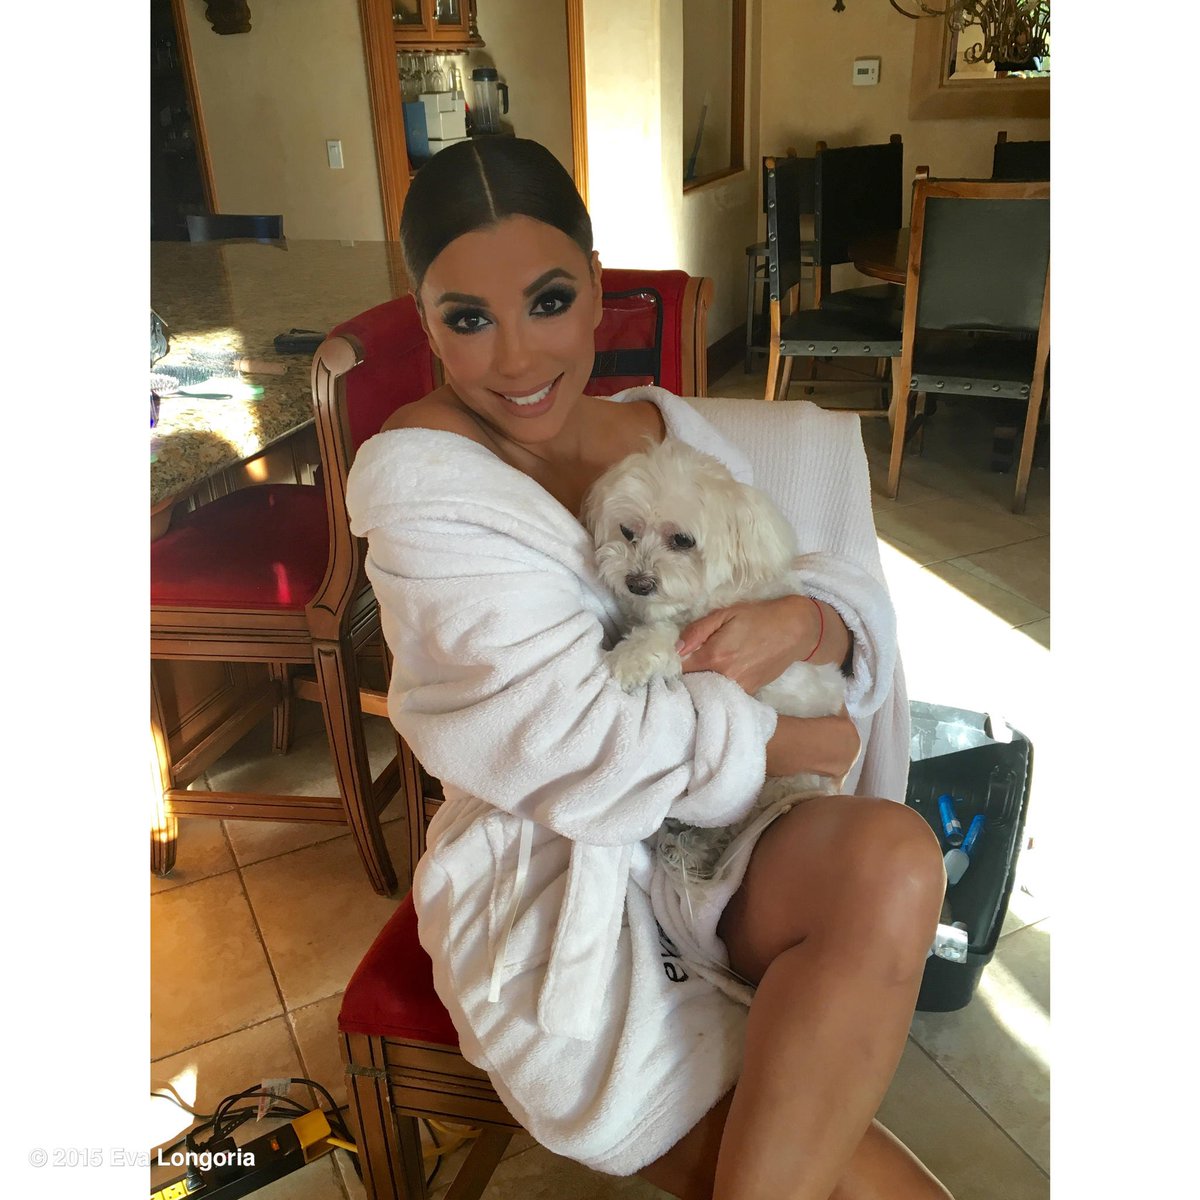 Getting ready to go to The Voice with Jinxy!! #Telenovela https://t.co/FvRUZzllQY